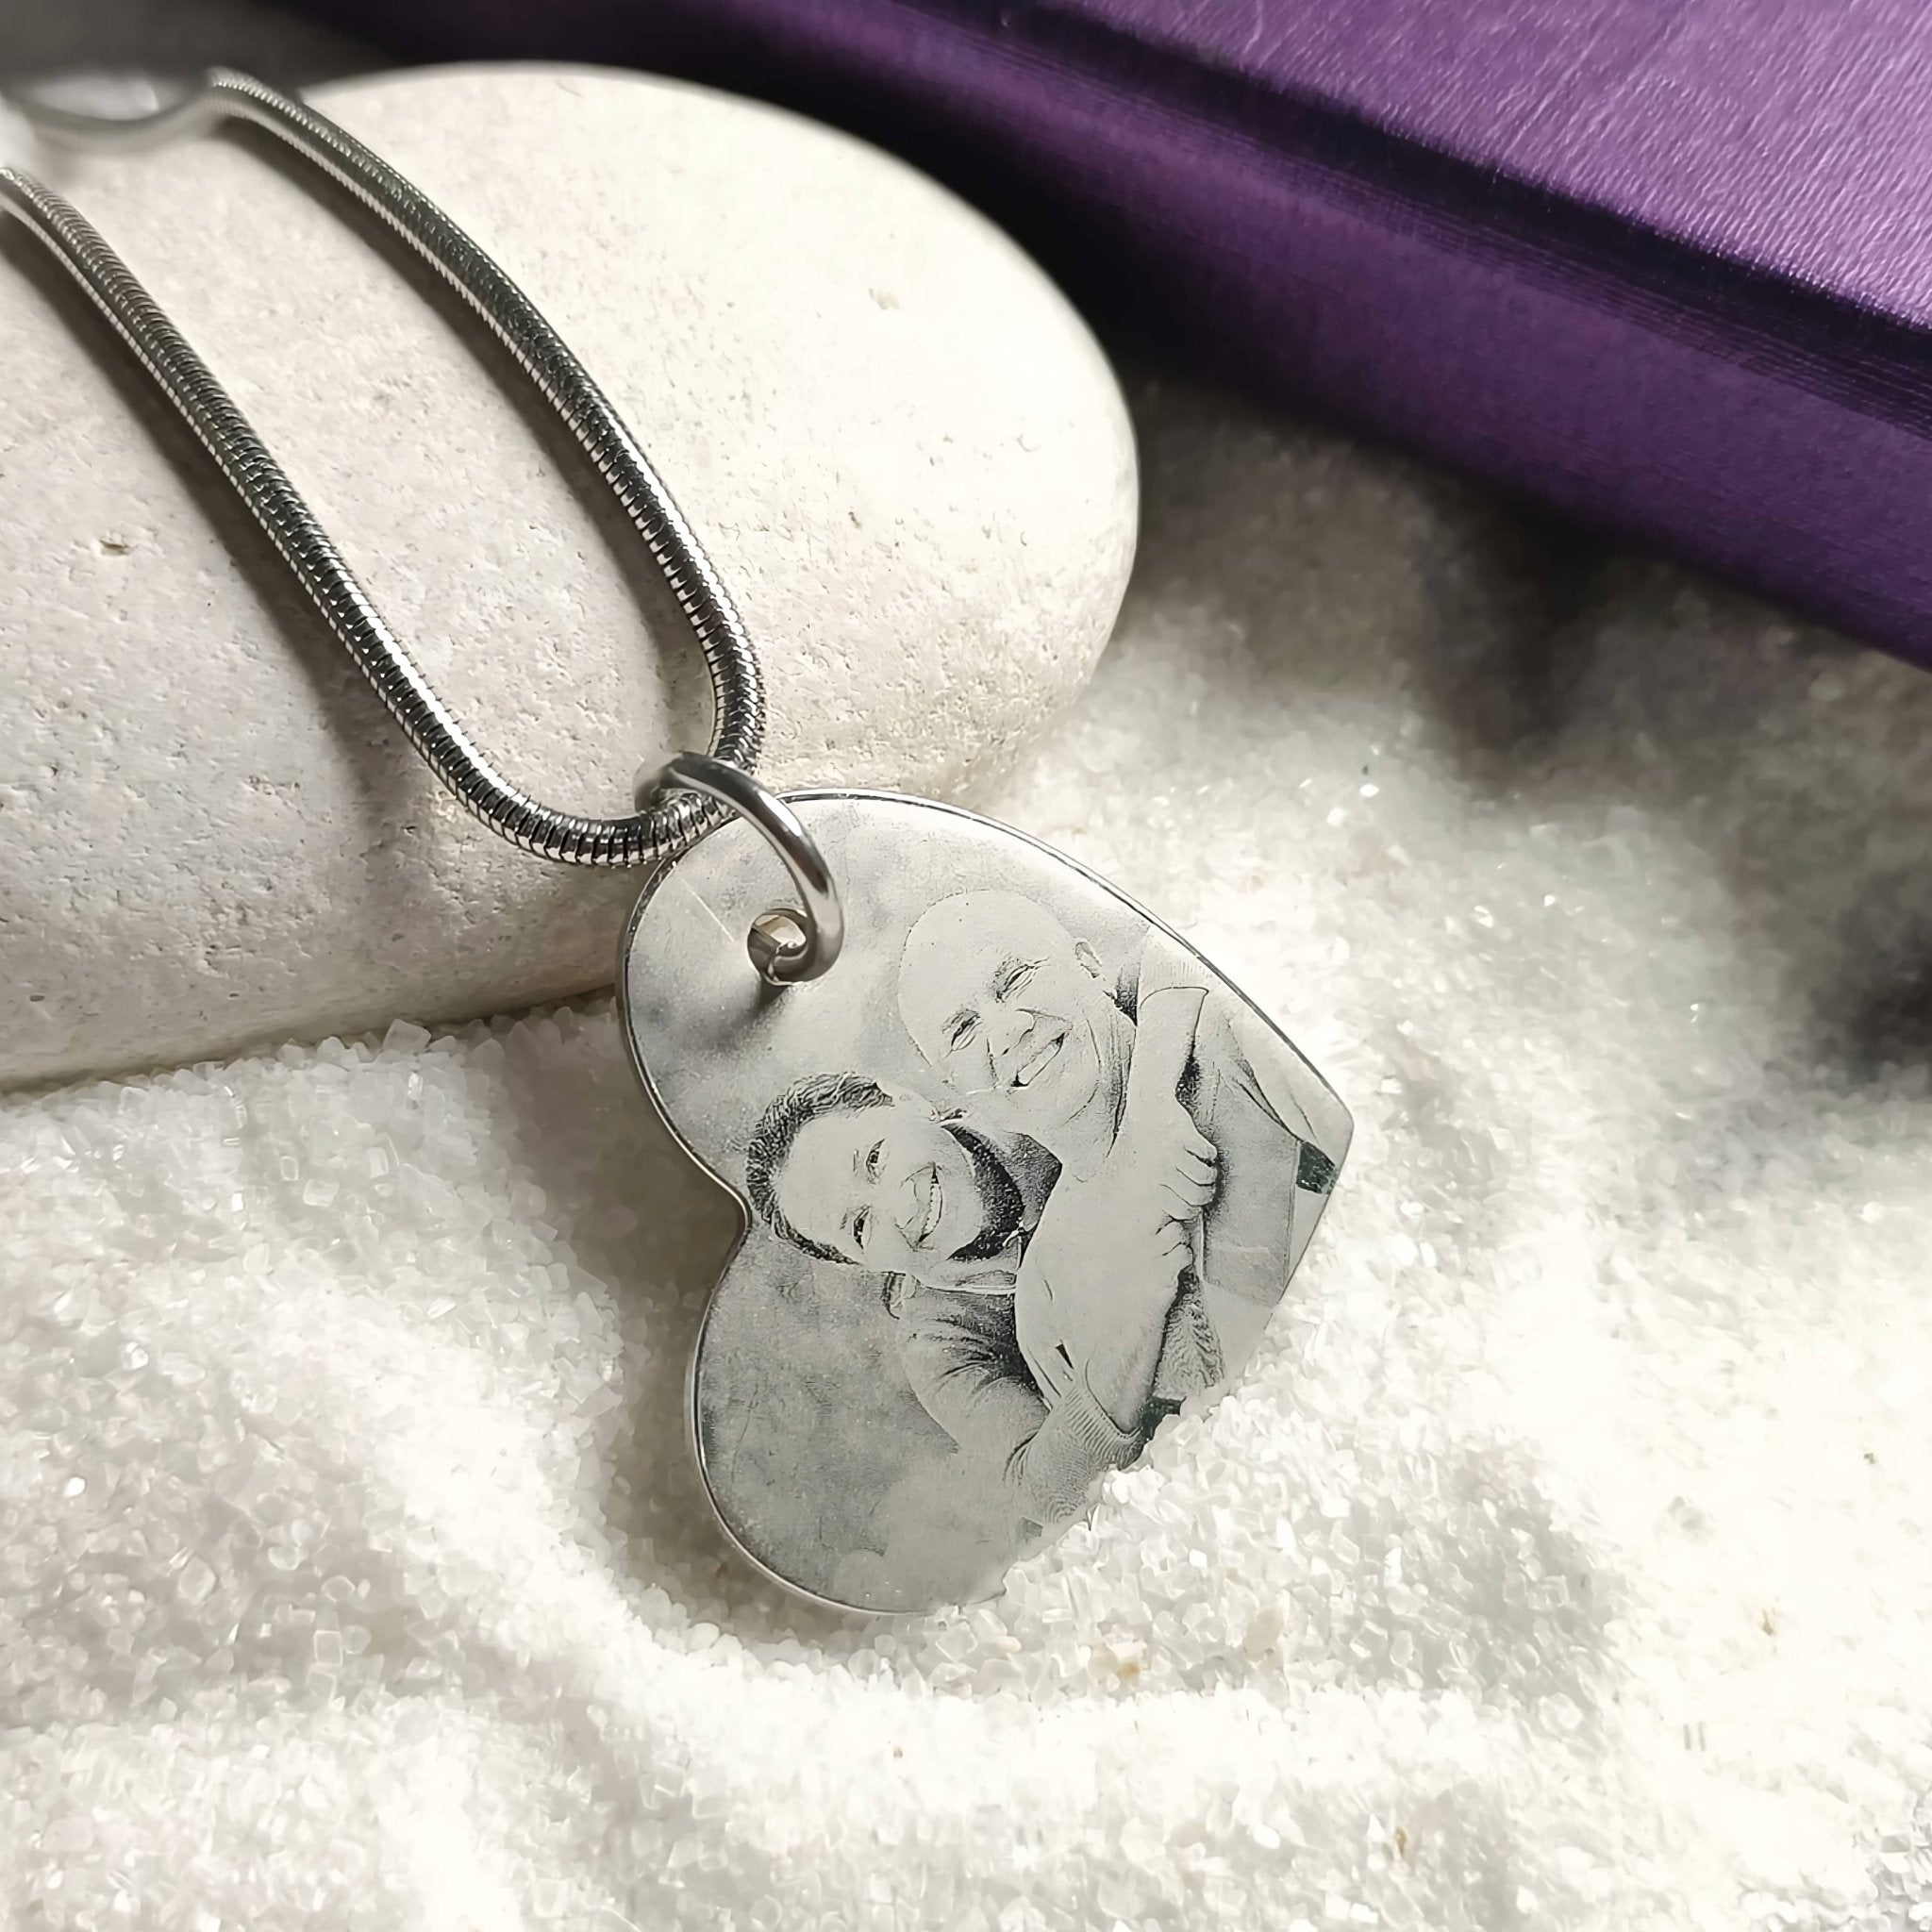 Bottom of My Heart Photo Necklace - Photo Jewellery by Belle Fever